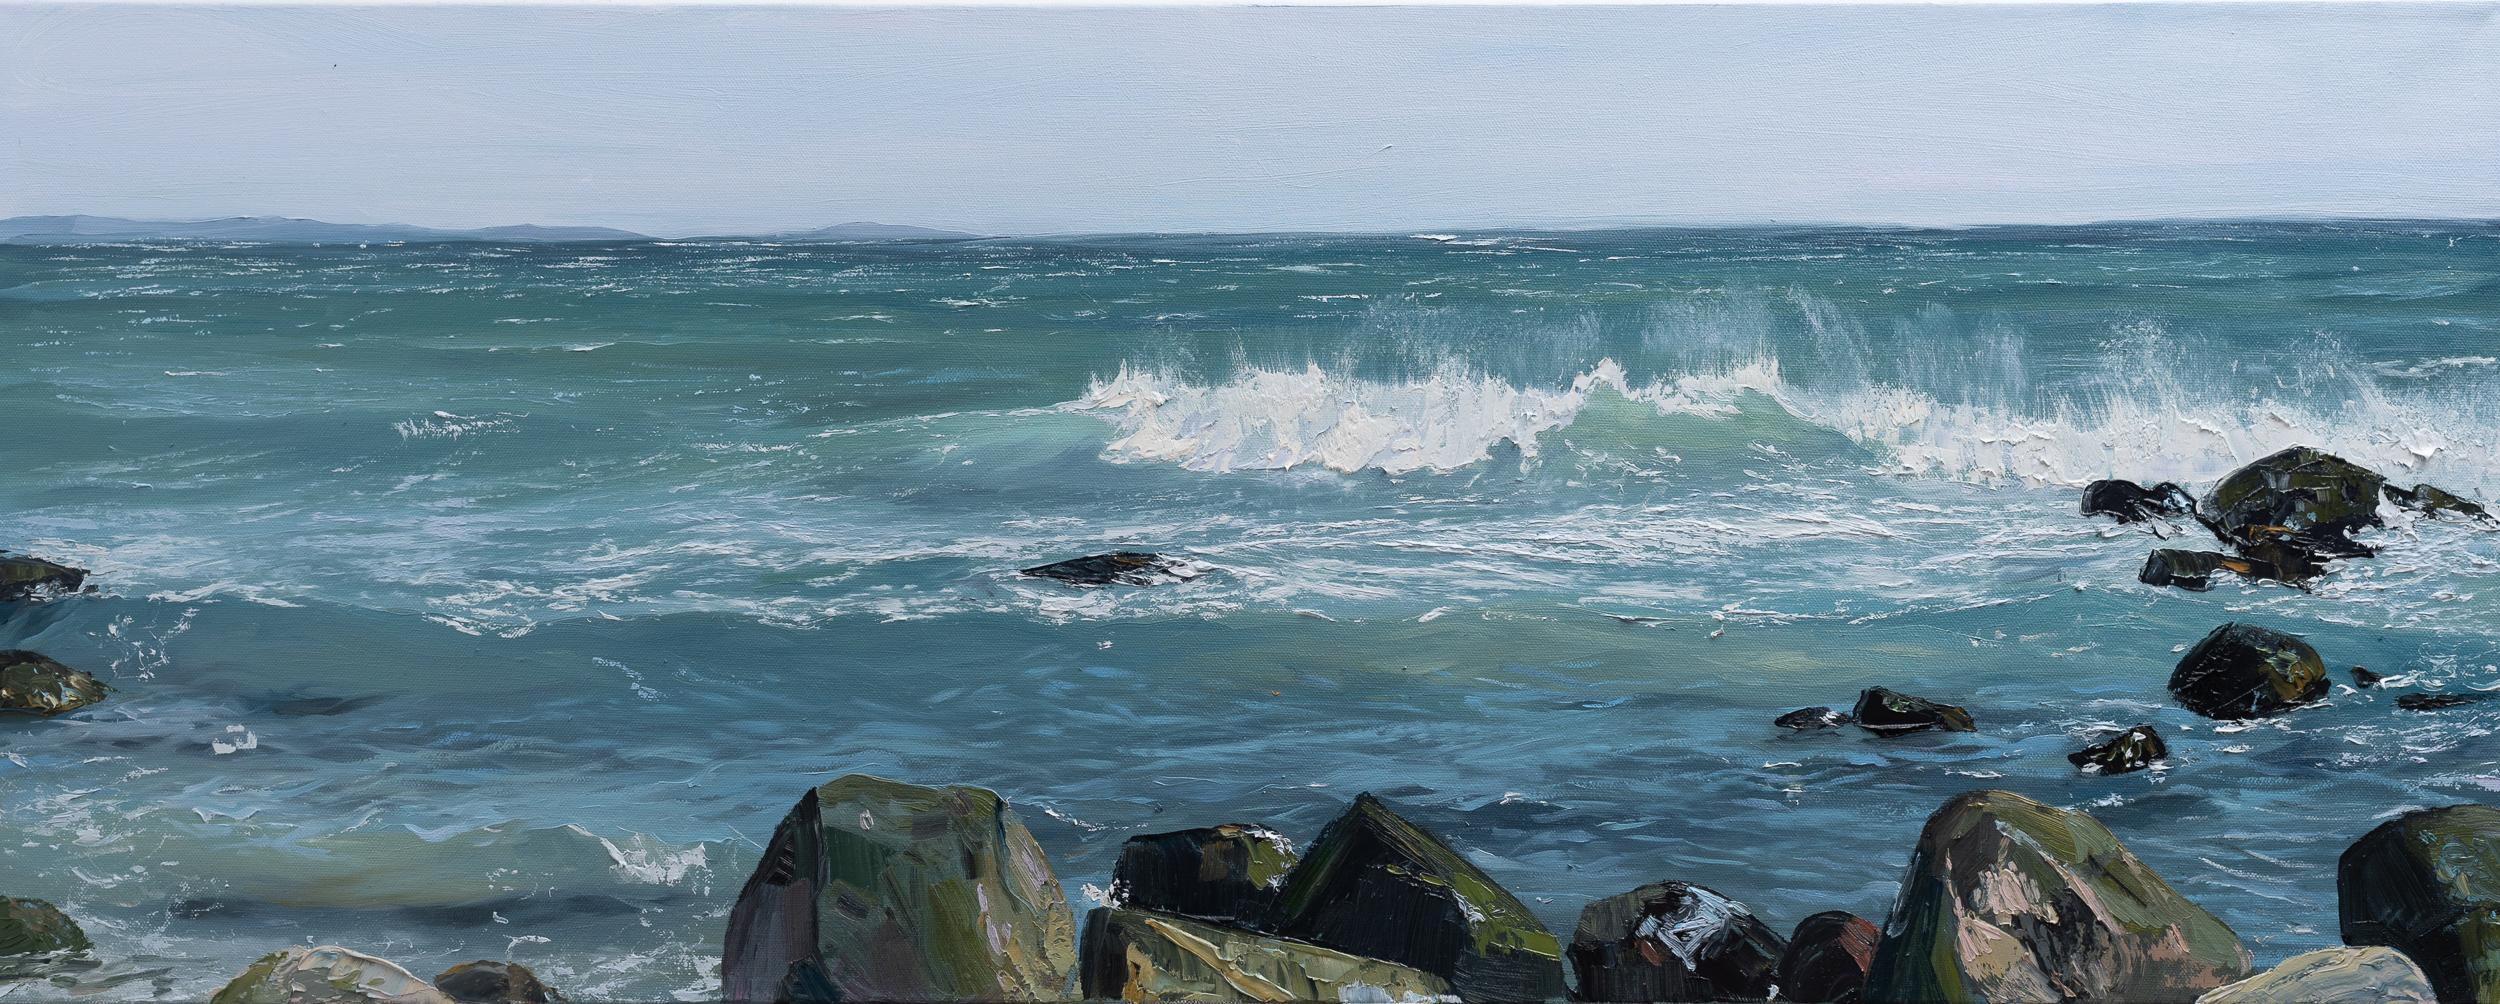 Annie Wildey Landscape Painting - "Summer Shore" oil painting of waves crashing on rocks in the ocean